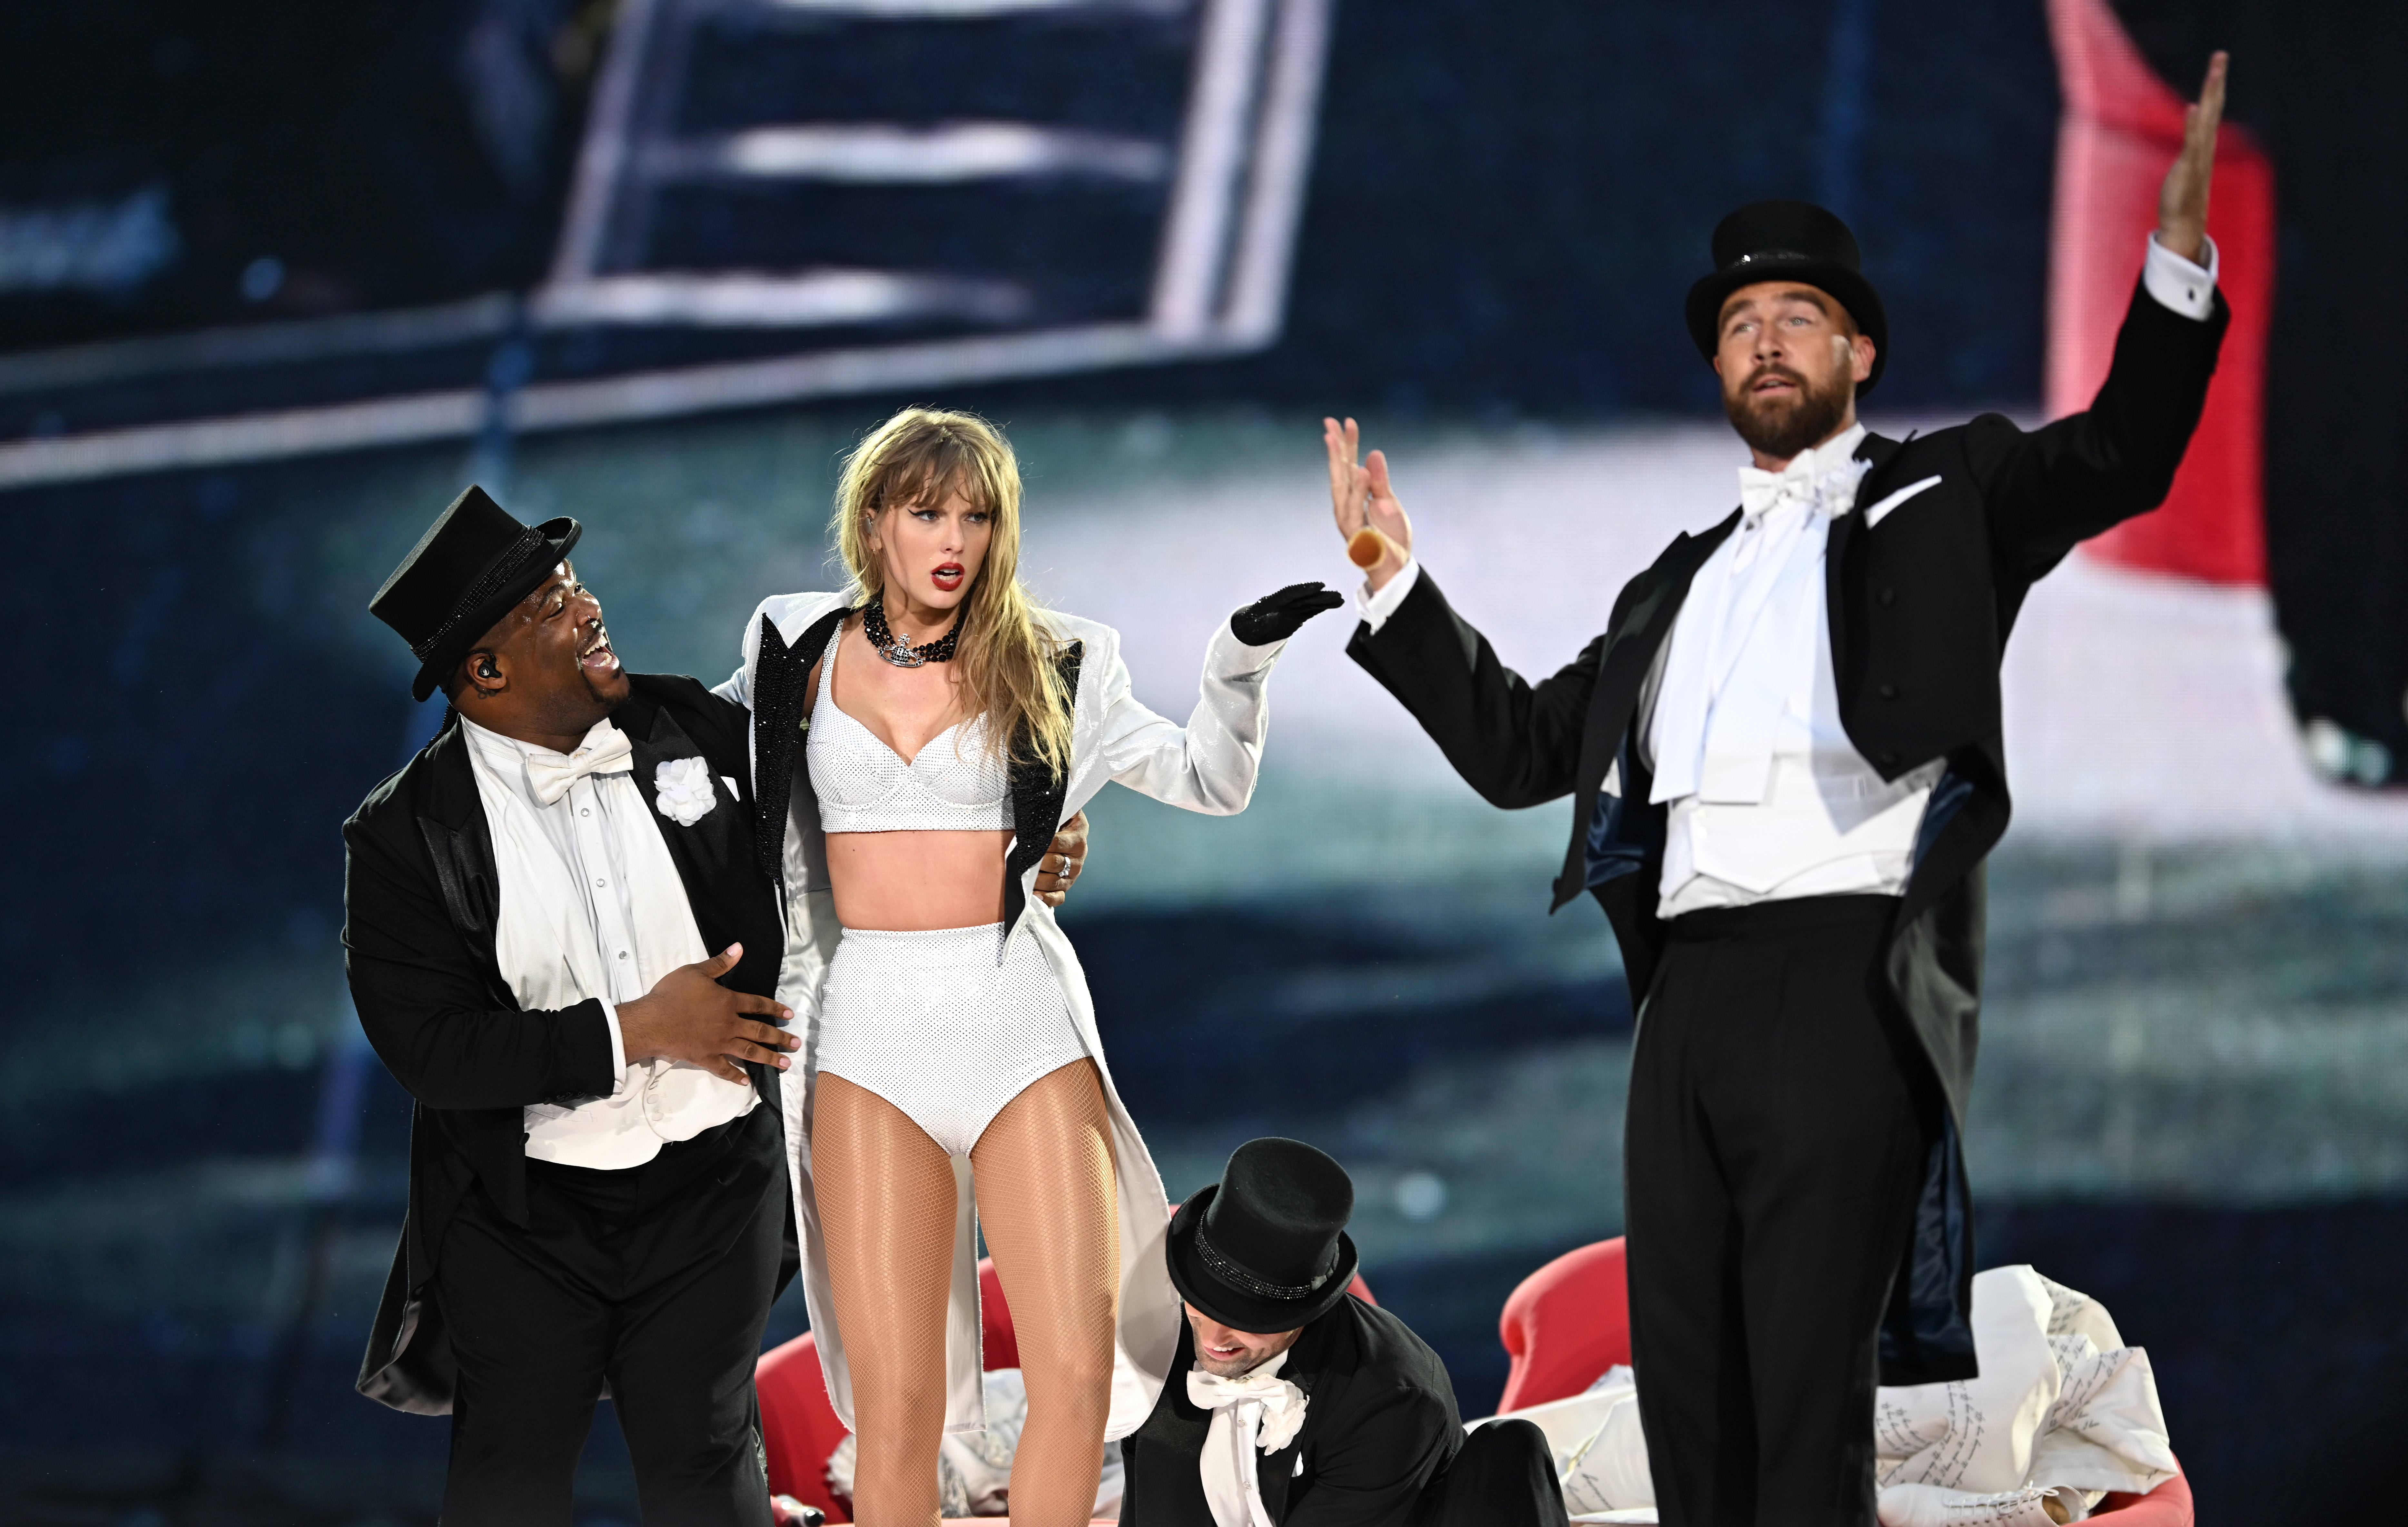 On June 23, Taylor Swift's boyfriend Travis Kelce made a surprise appearance on stage during the third night of her Eras Tour in London, England